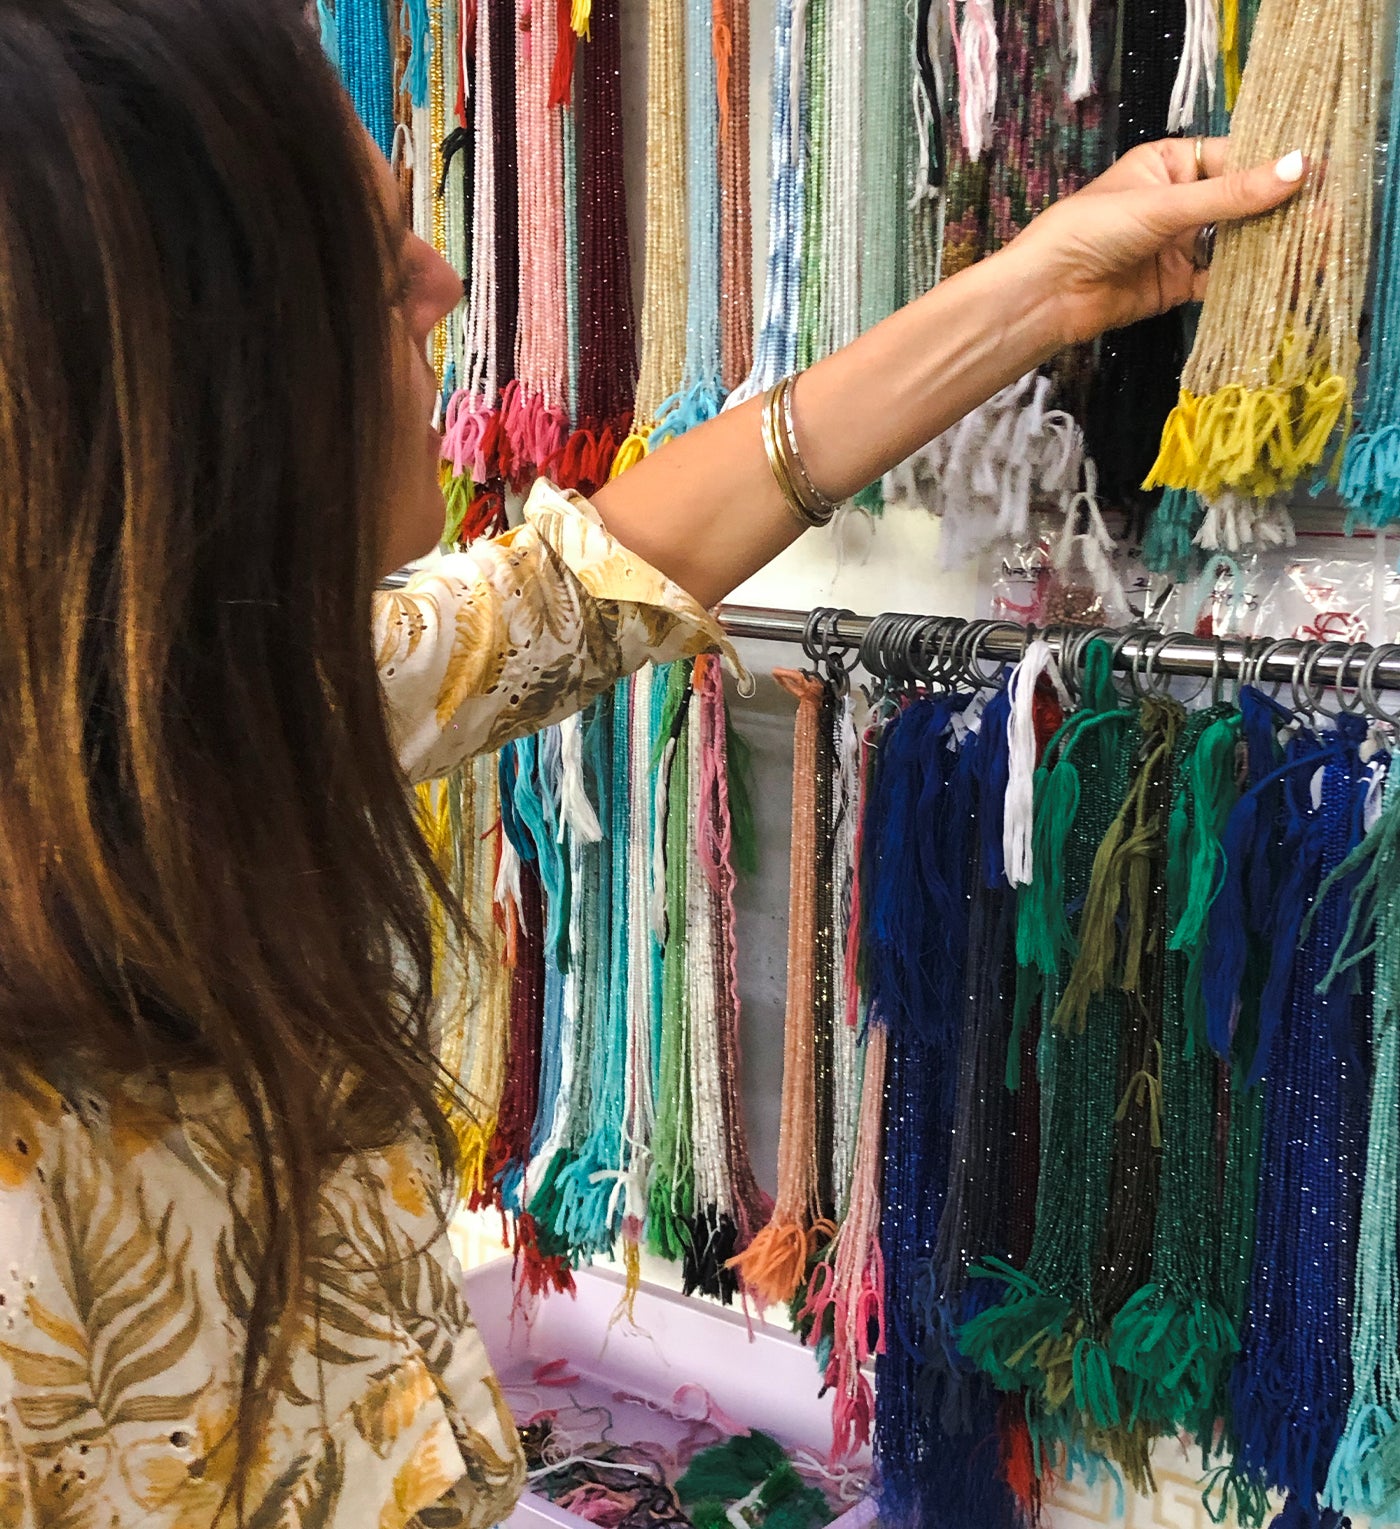 Woman traveler admiring a beautiful collection of beads in a store